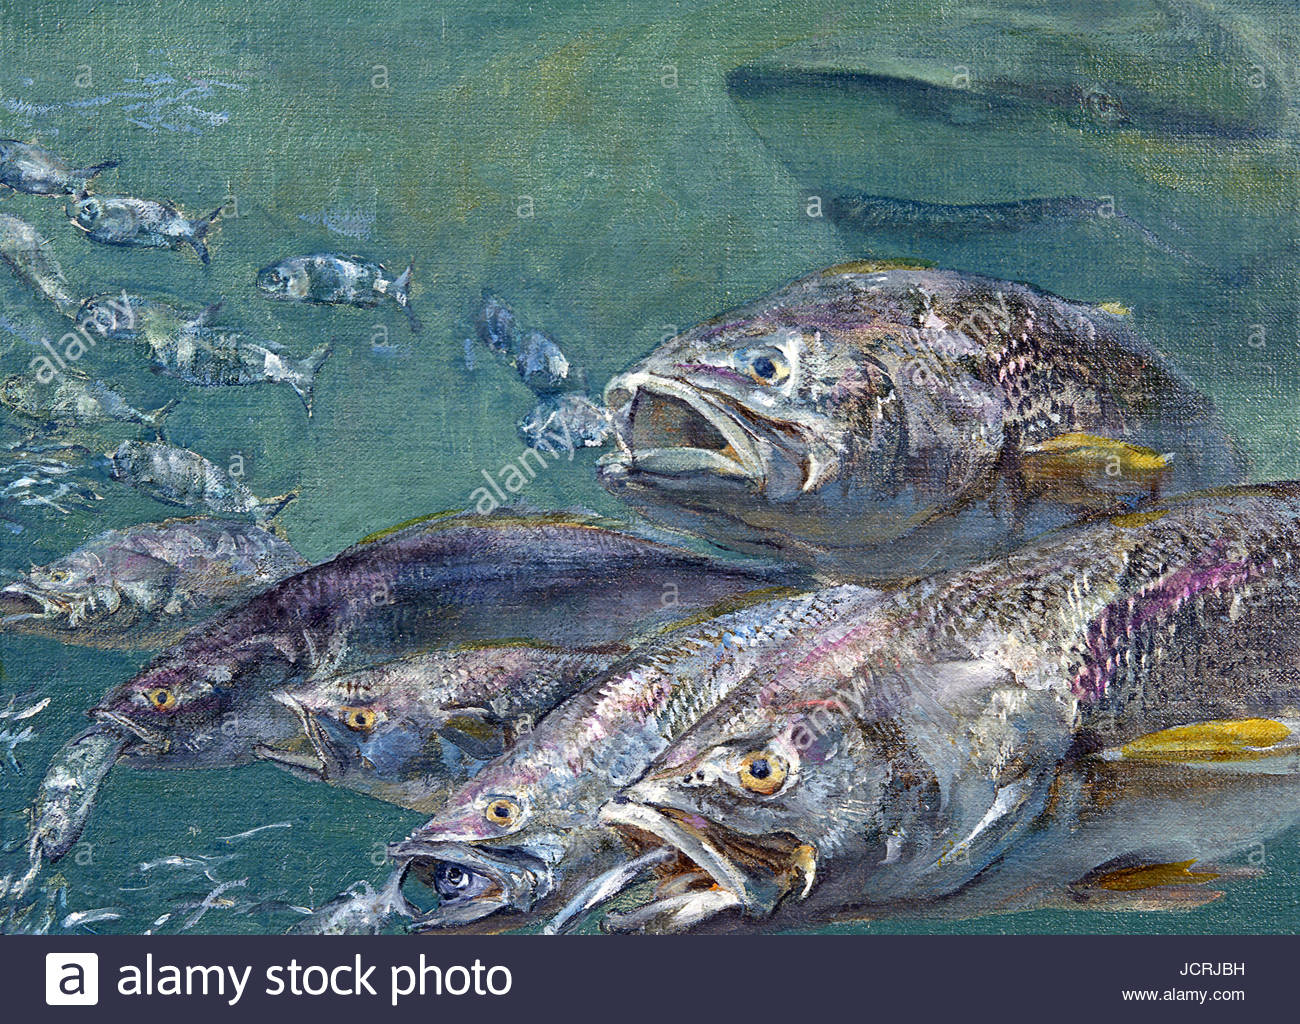 A school of weakfish flee an oncoming shark as smaller fish lead the way. Stock Photo